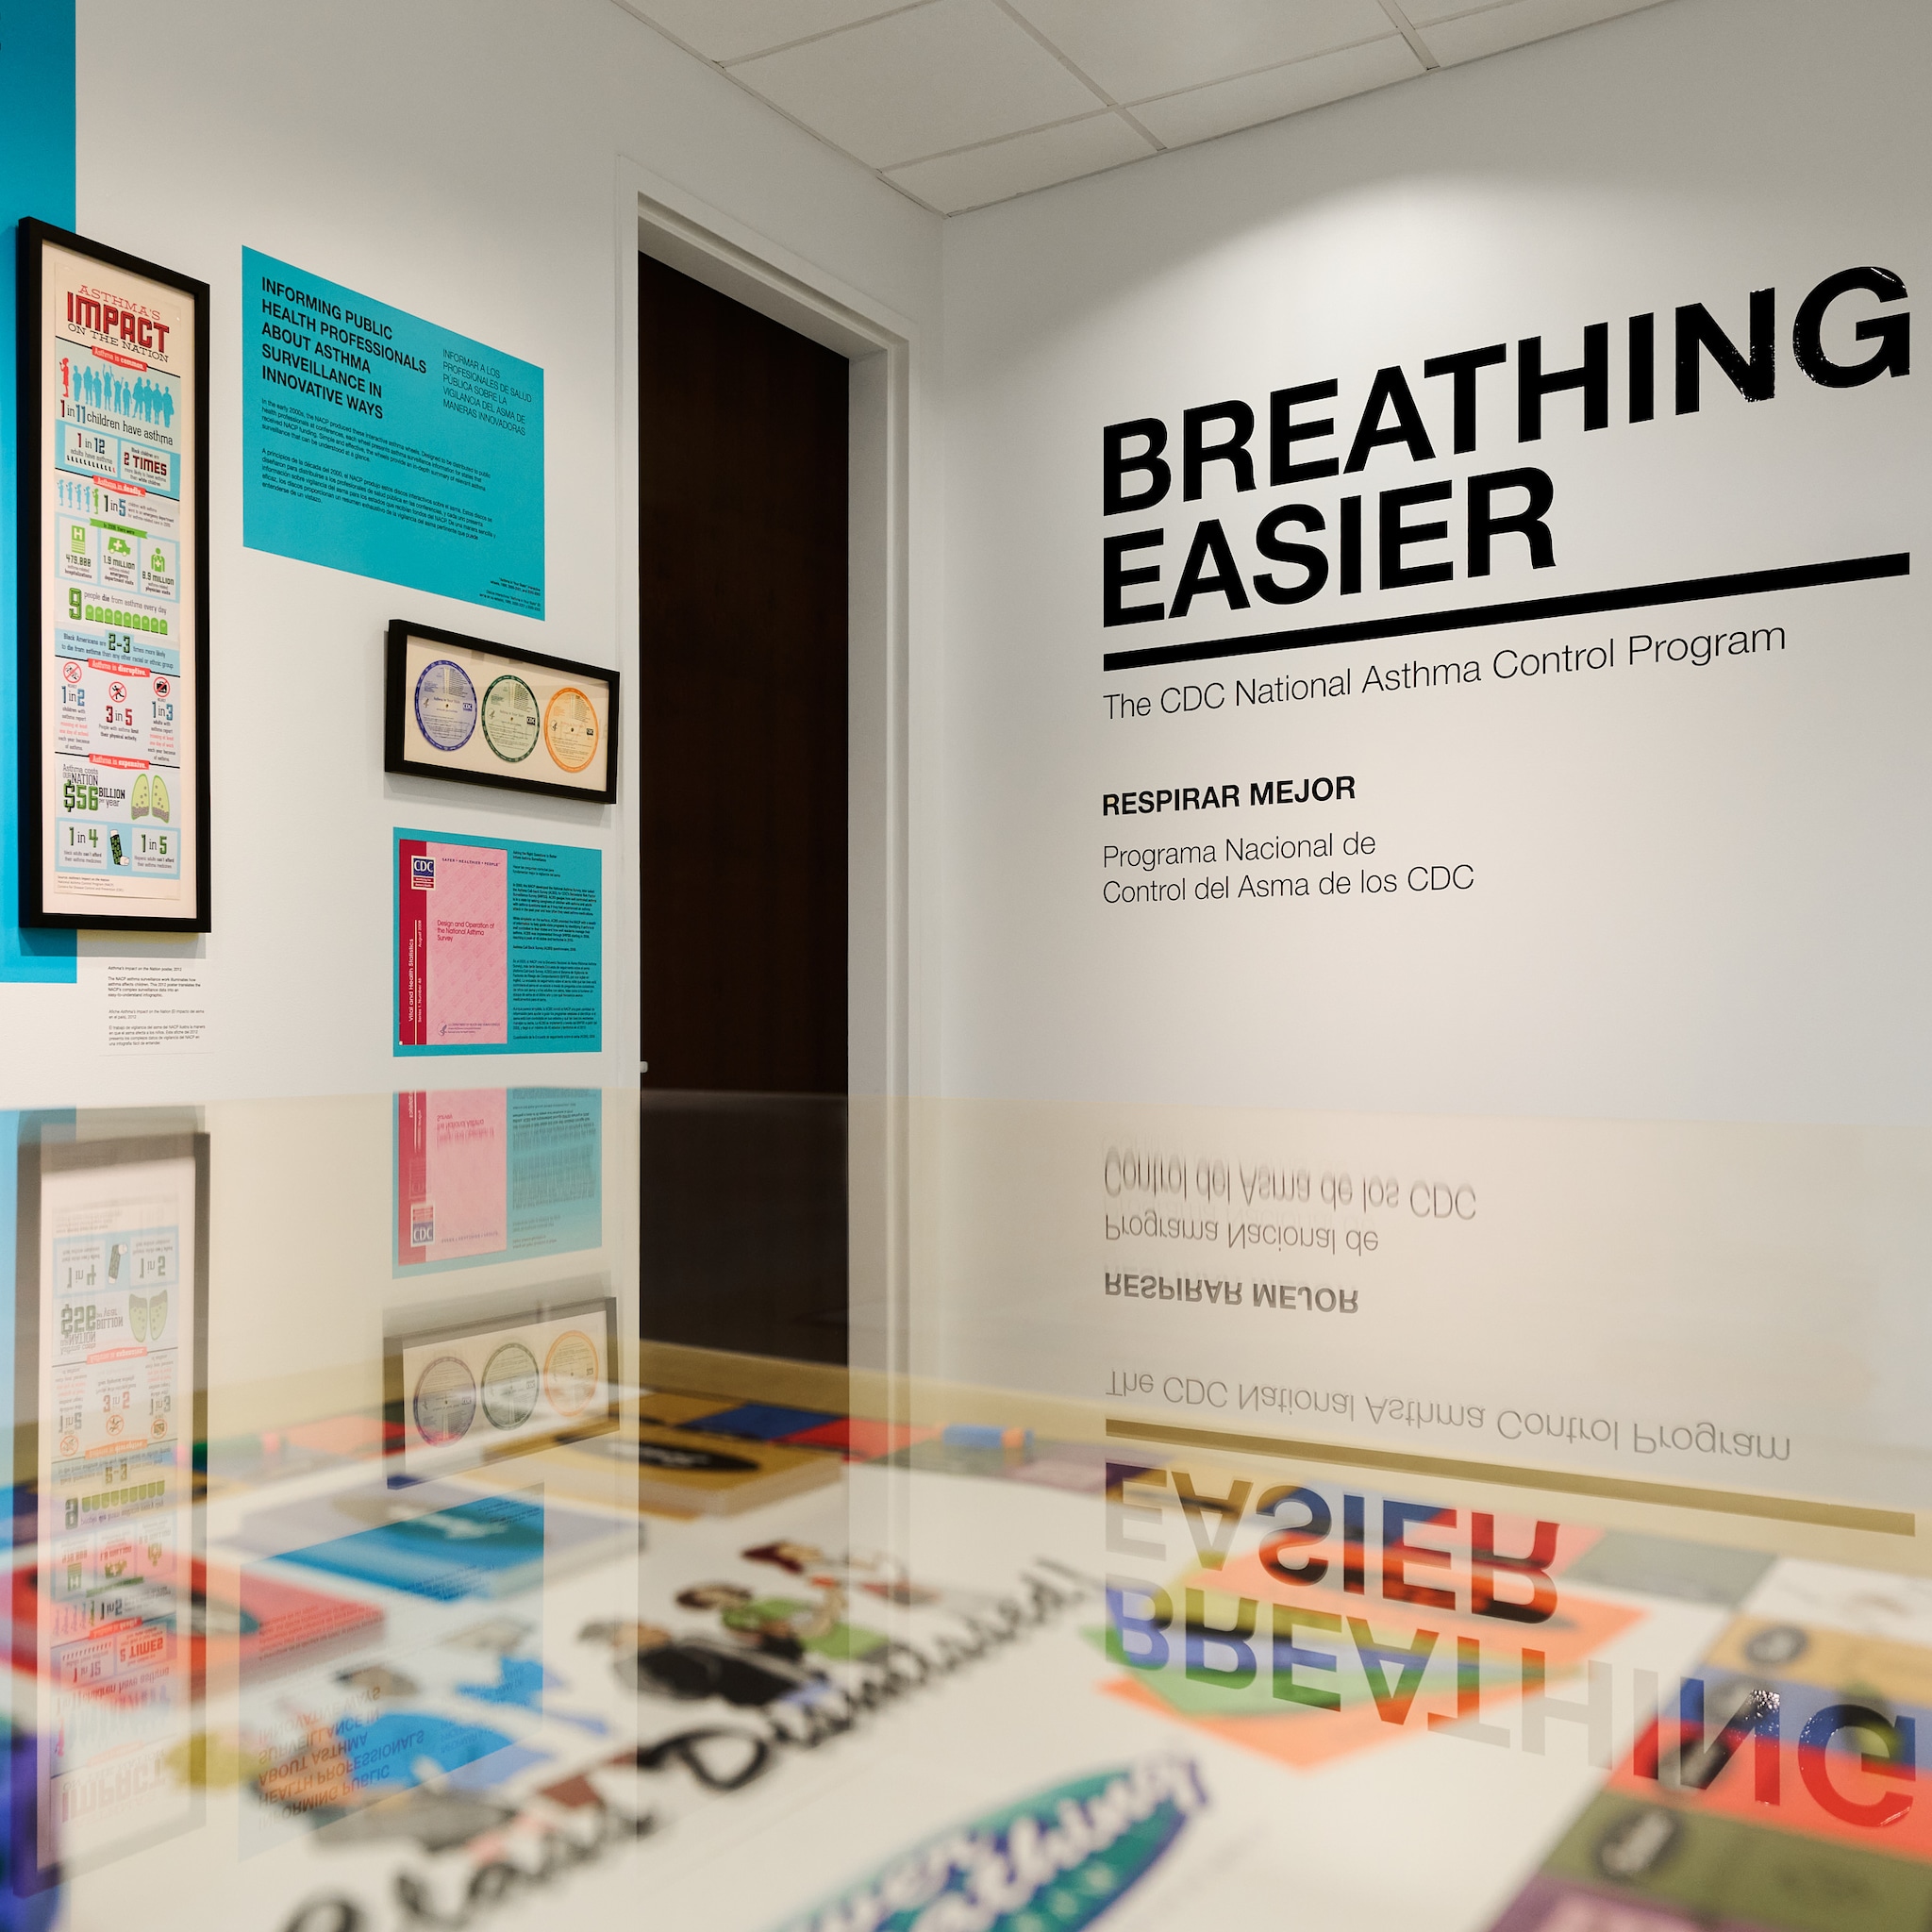 Breathing Easier: The CDC National Asthma Control Program